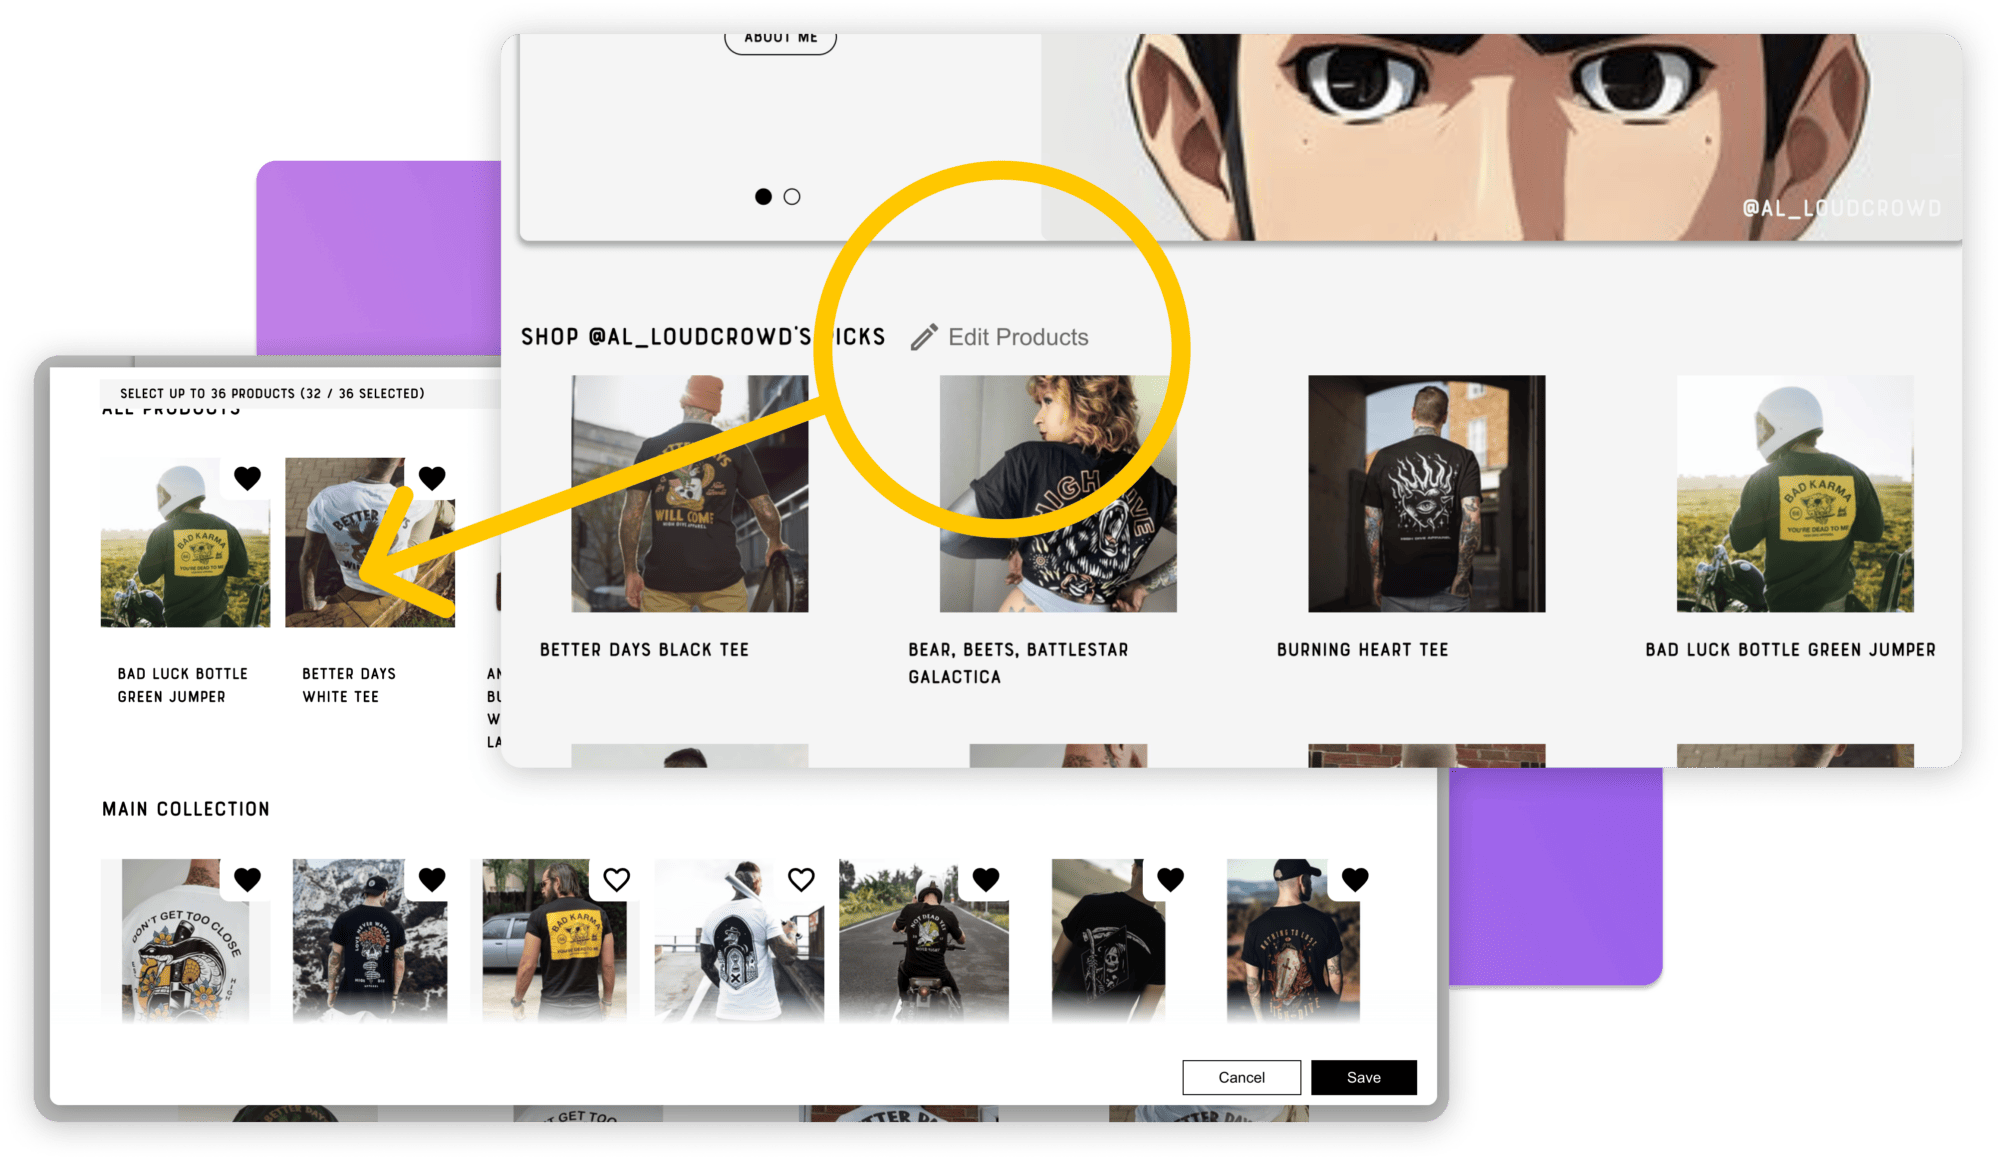 Influencer Storefronts enable any creator to curate products to have on their personal page